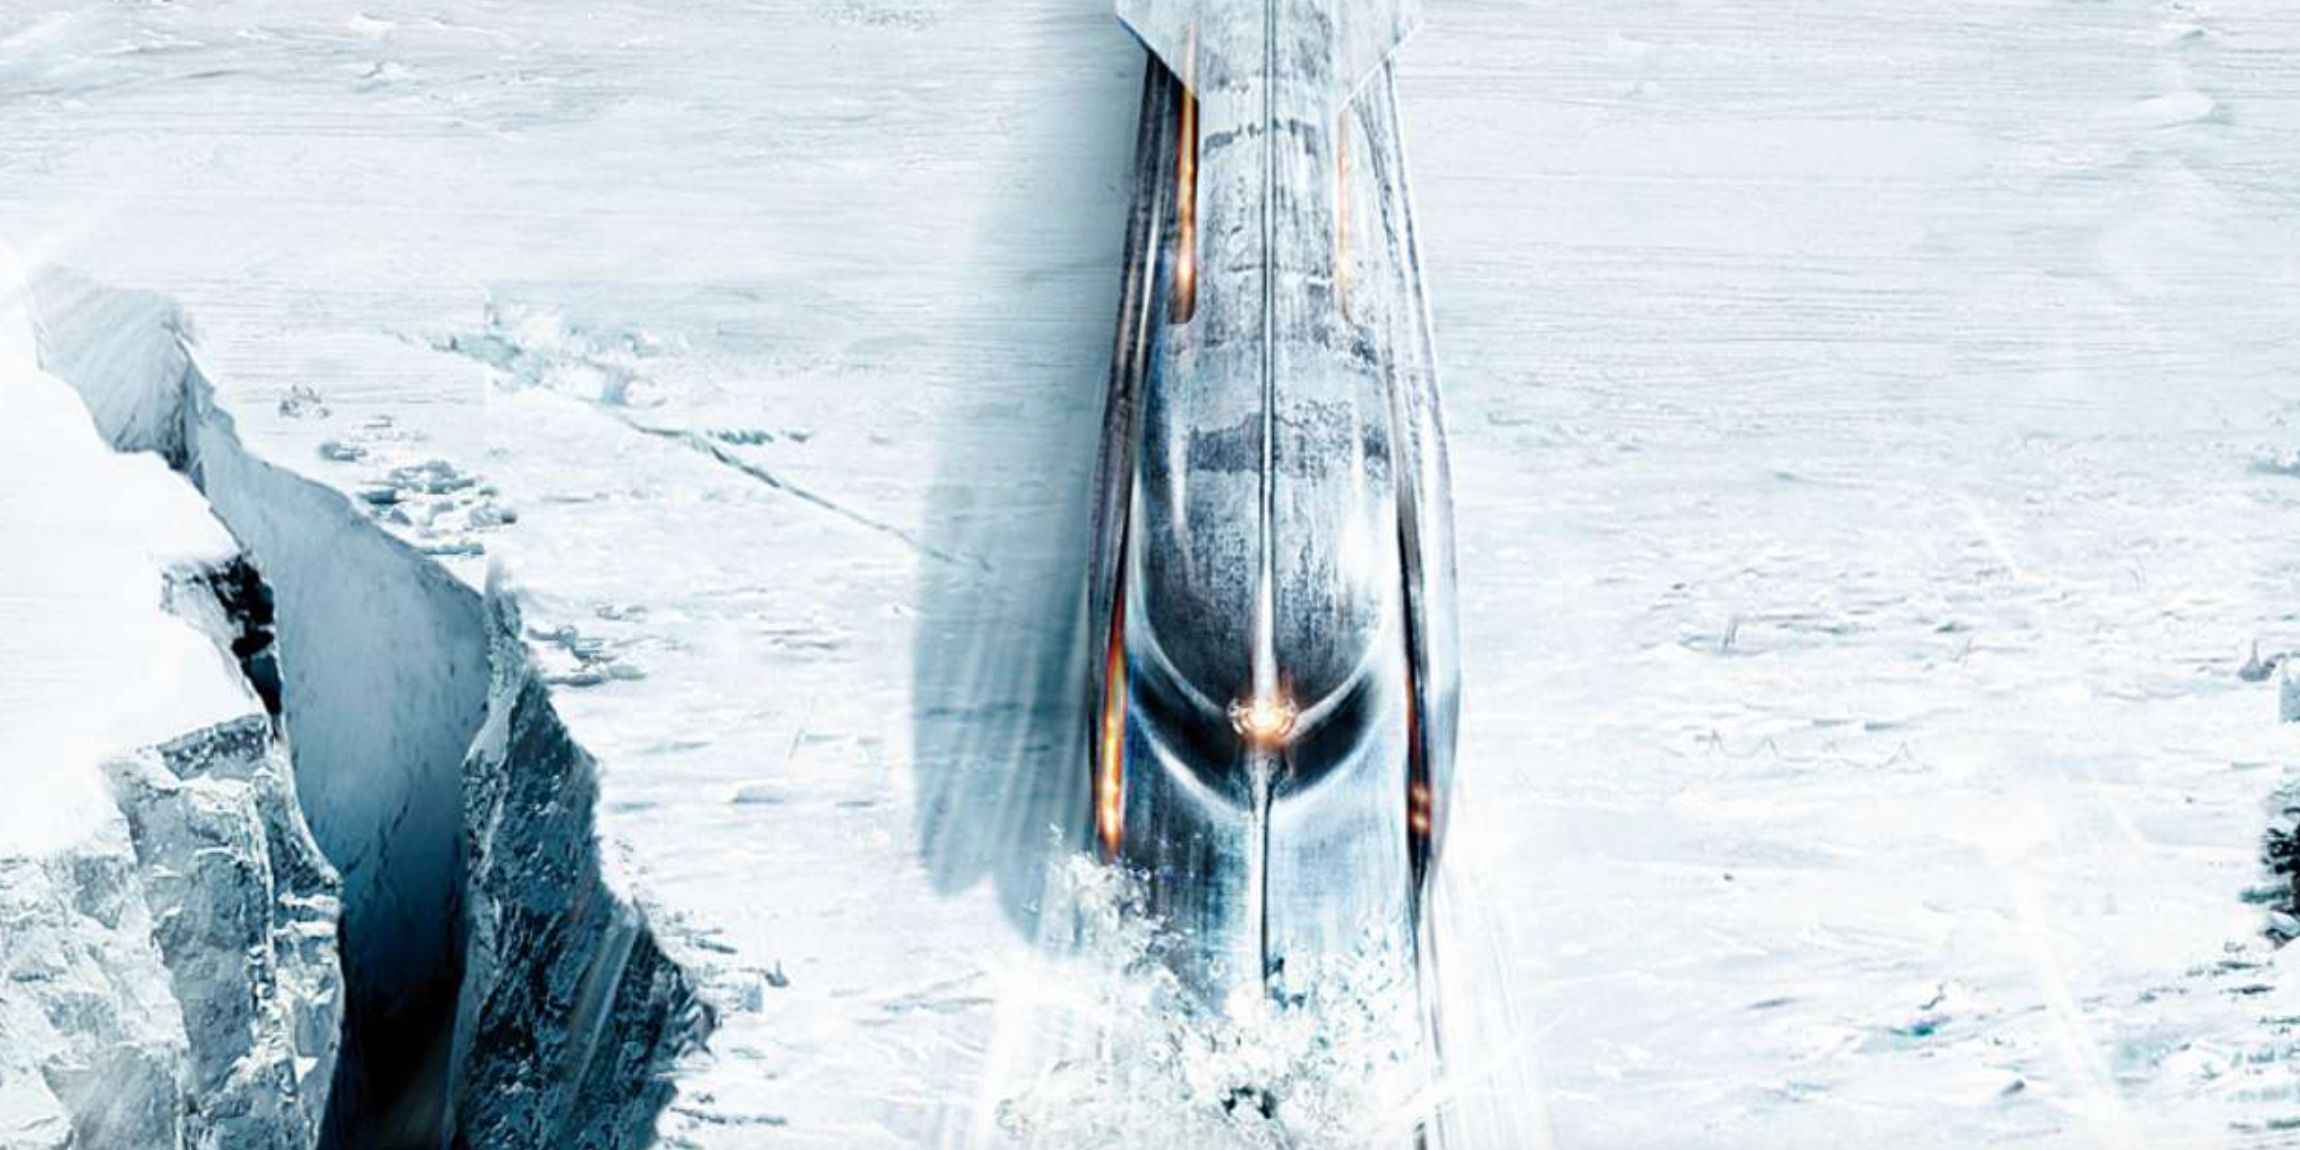 The train rushes through the snow in Snowpiercer